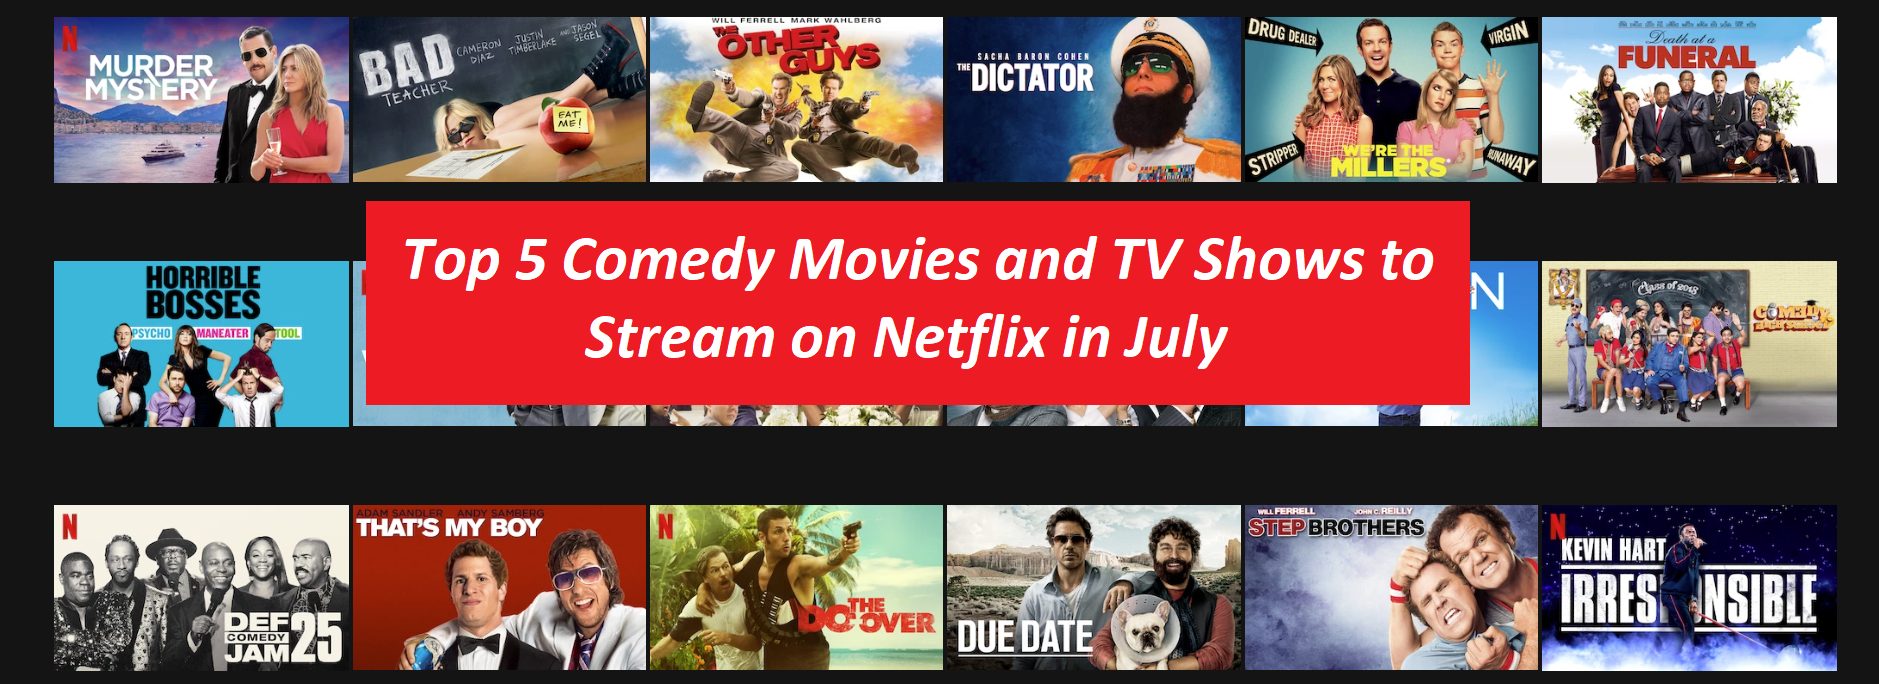 Top 5 Comedy Movies and Shows to Stream on Netflix in July